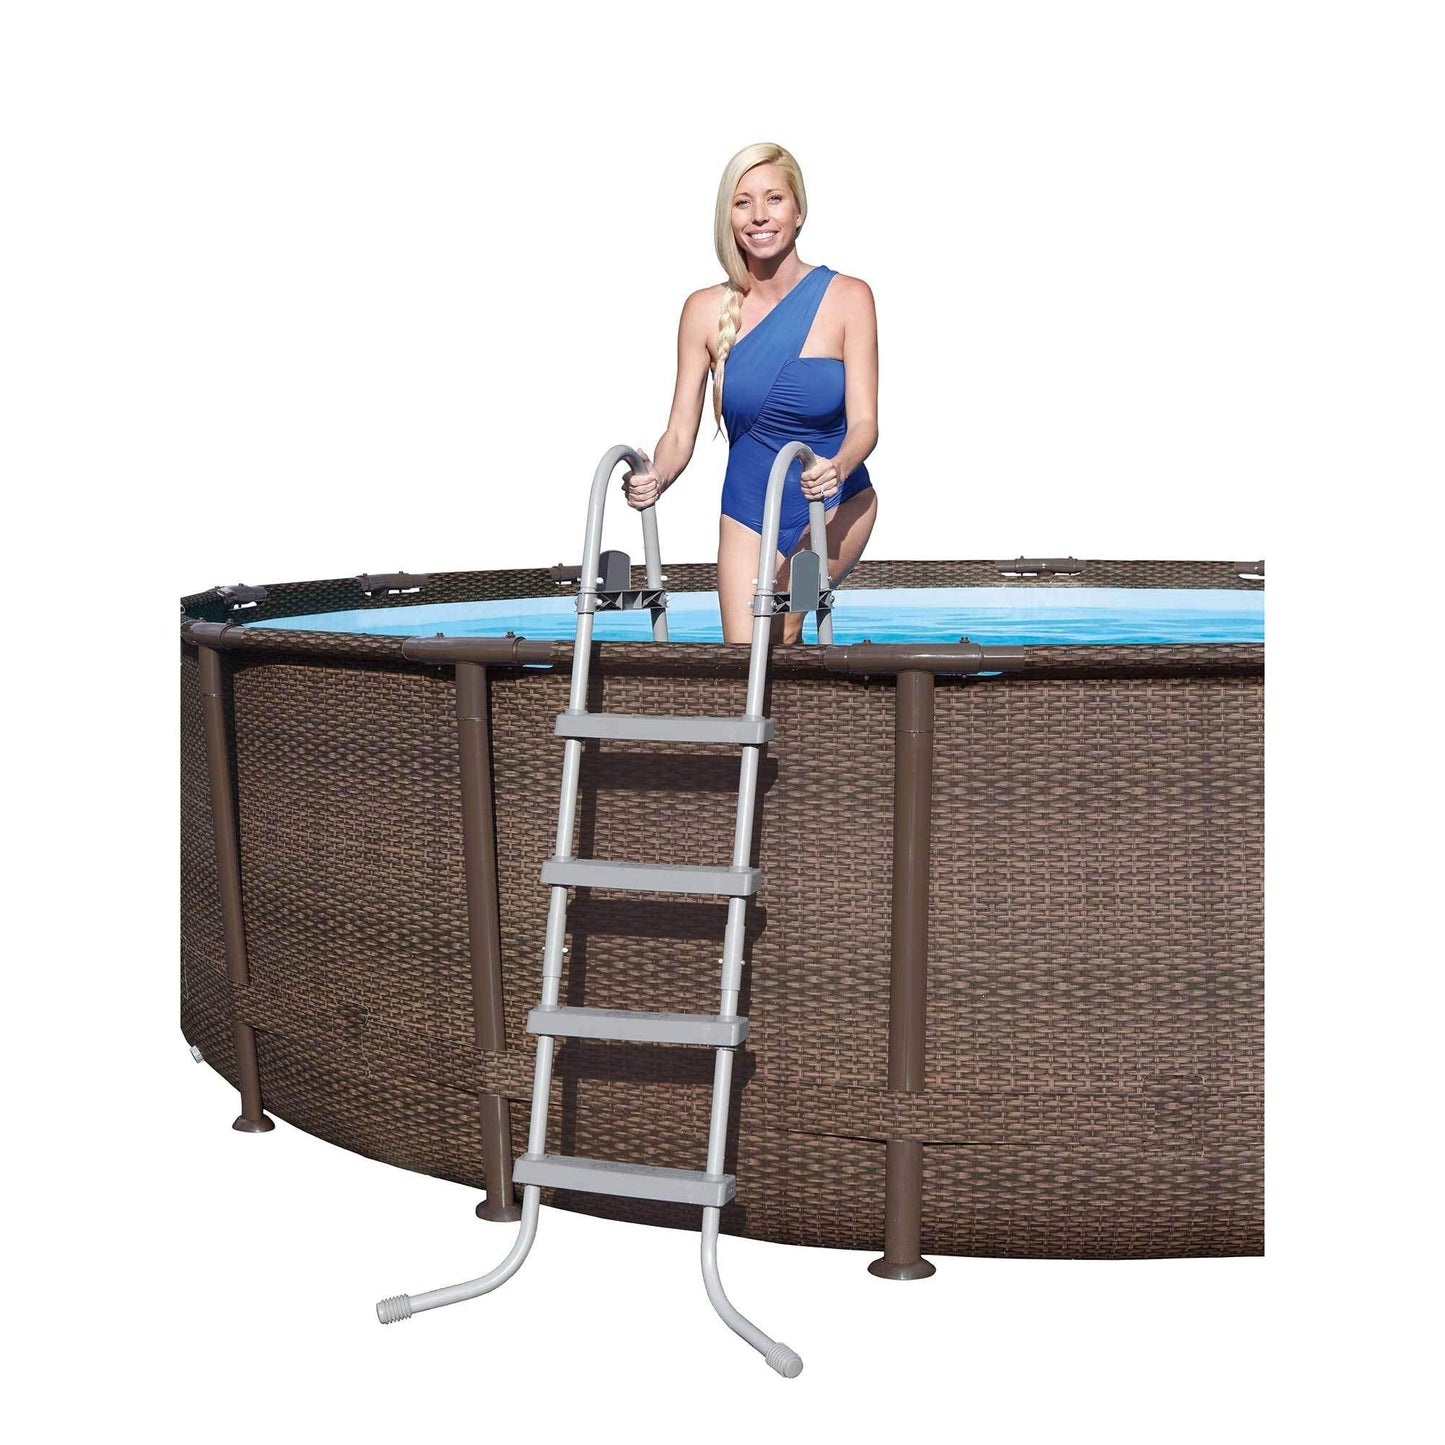 Bestway Power Steel 14 Foot x 42 Inch Round Above Ground Outdoor Backyard Swimming Pool Set with Filter Pump, Ladder, and Pool Cover 14' x 42" Gray